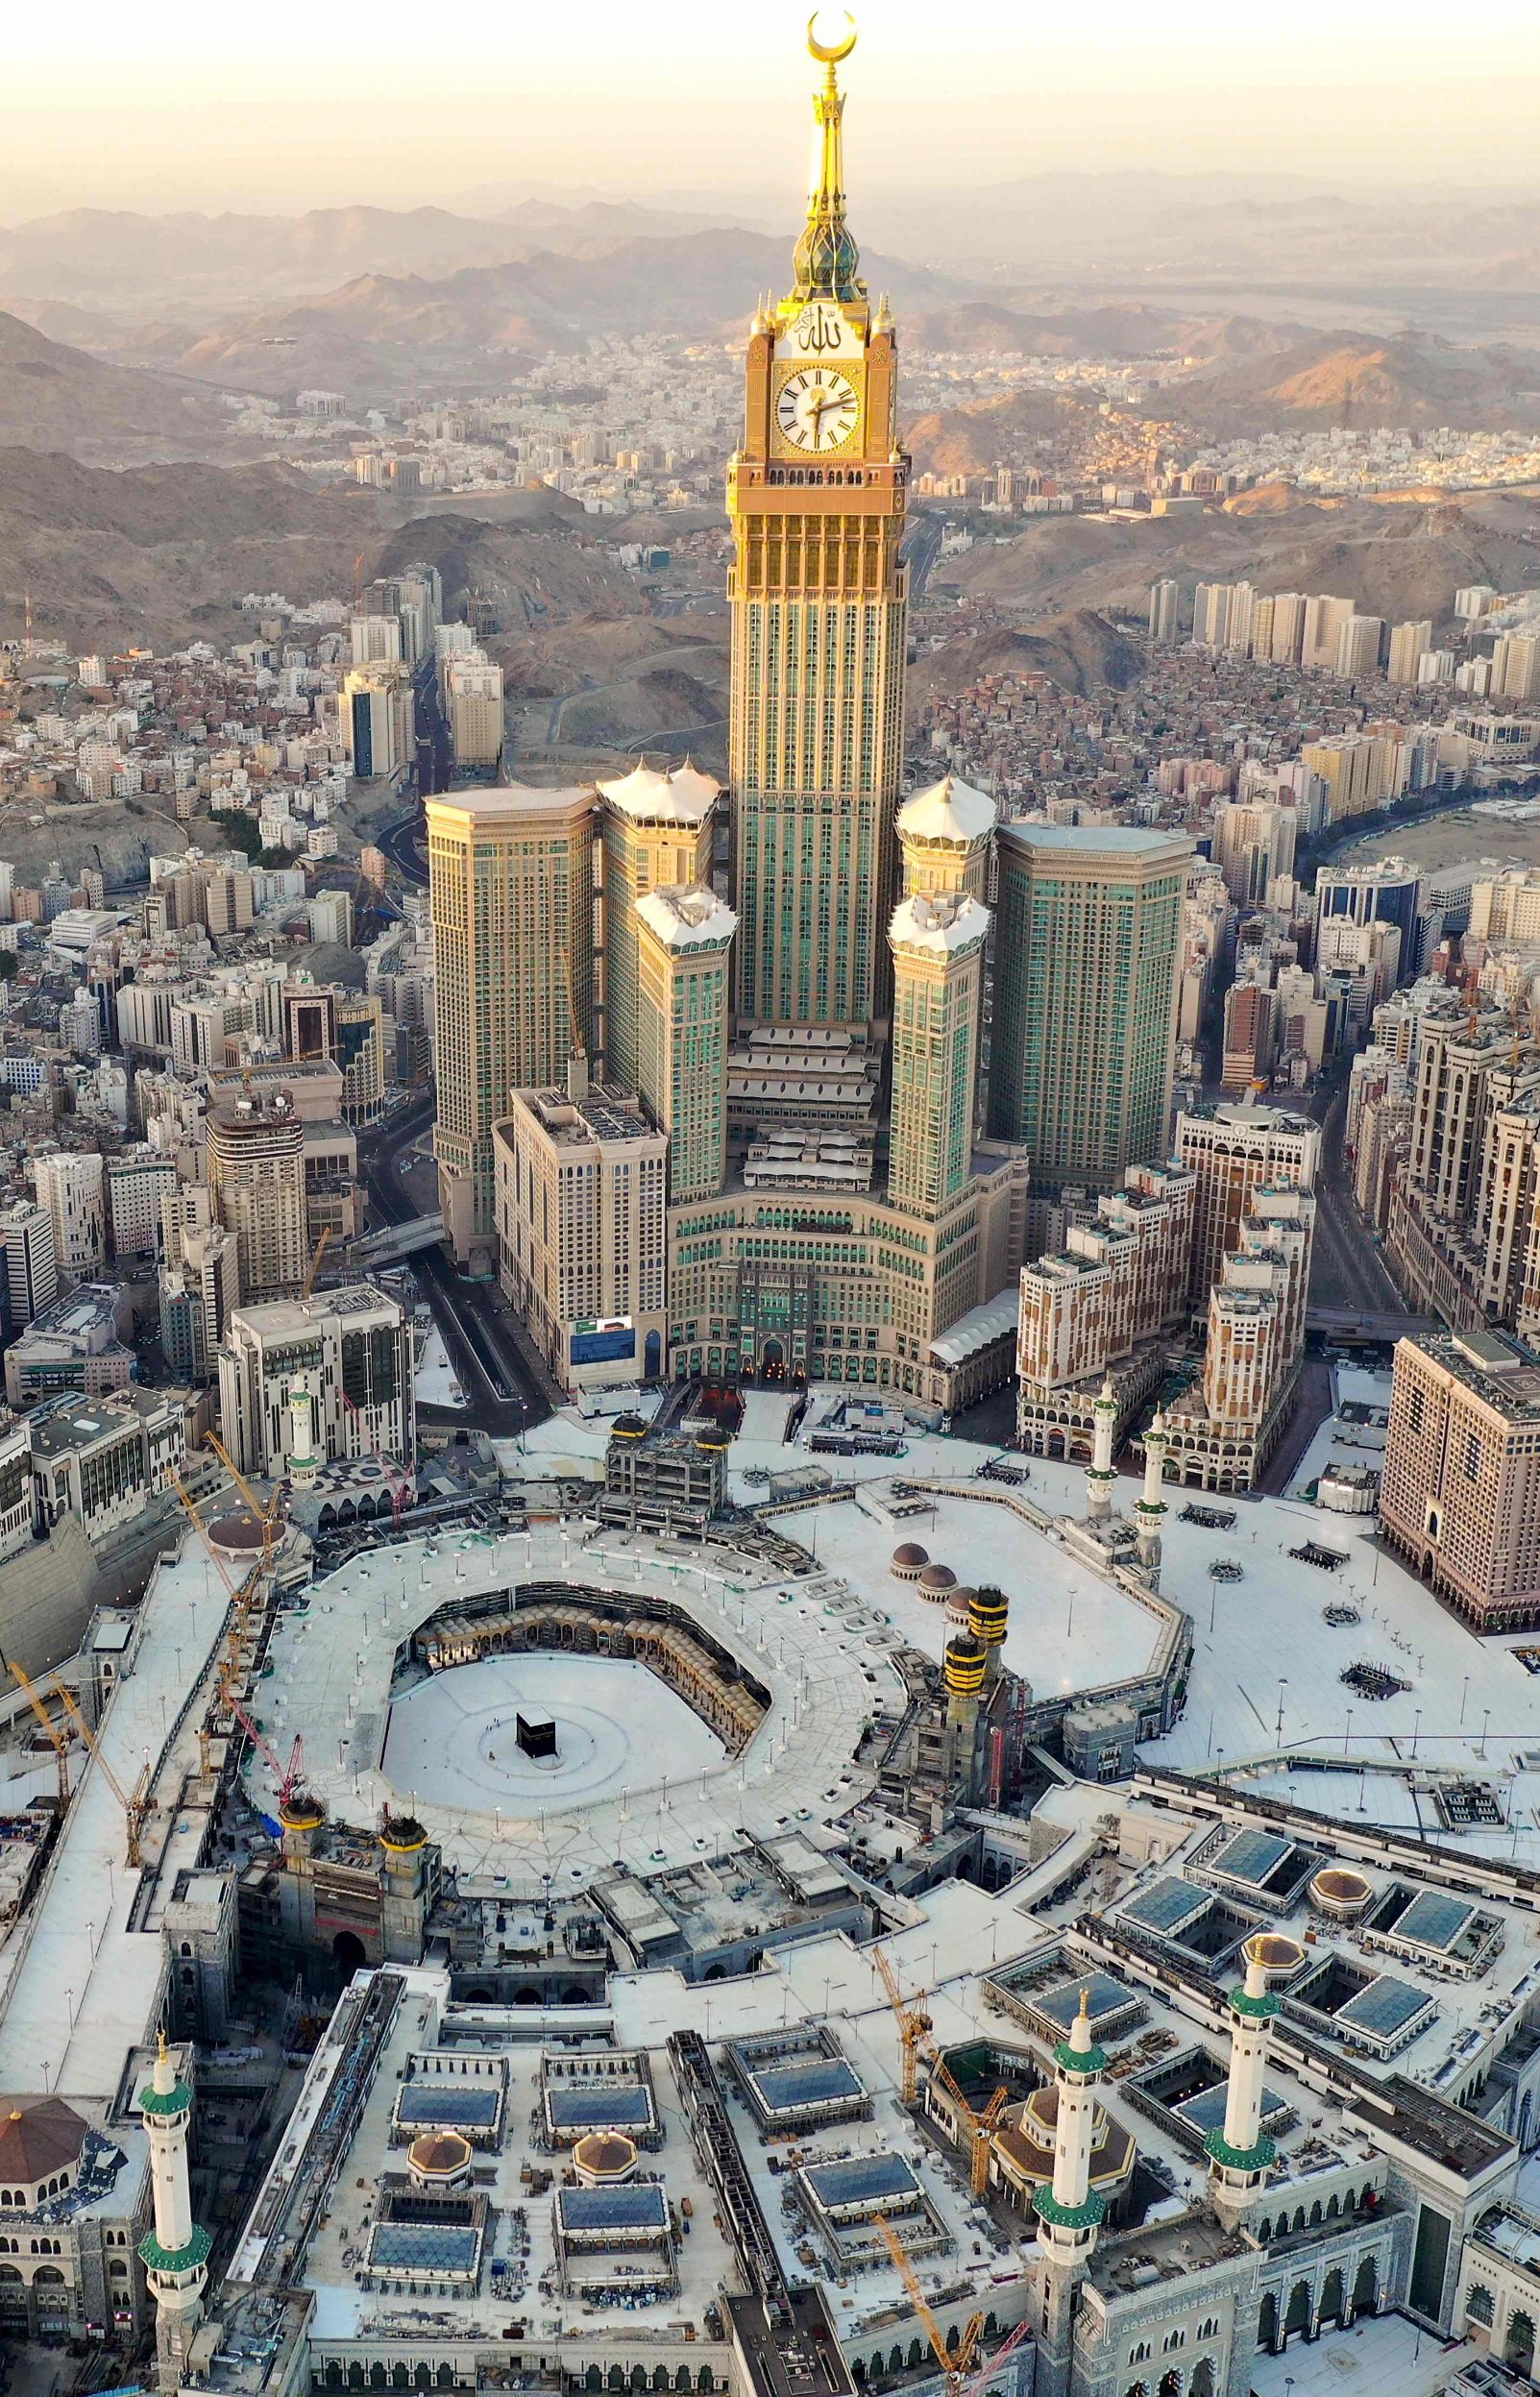 An aerial view shows the Great Mosque and the Mecca Tower,  deserted on the first day of the Muslim fasting month of Ramadan, in the Saudi holy city of Mecca, on April 24, 2020, during the novel coronavirus pandemic crisis. (Photo by BANDAR ALDANDANI / AFP)